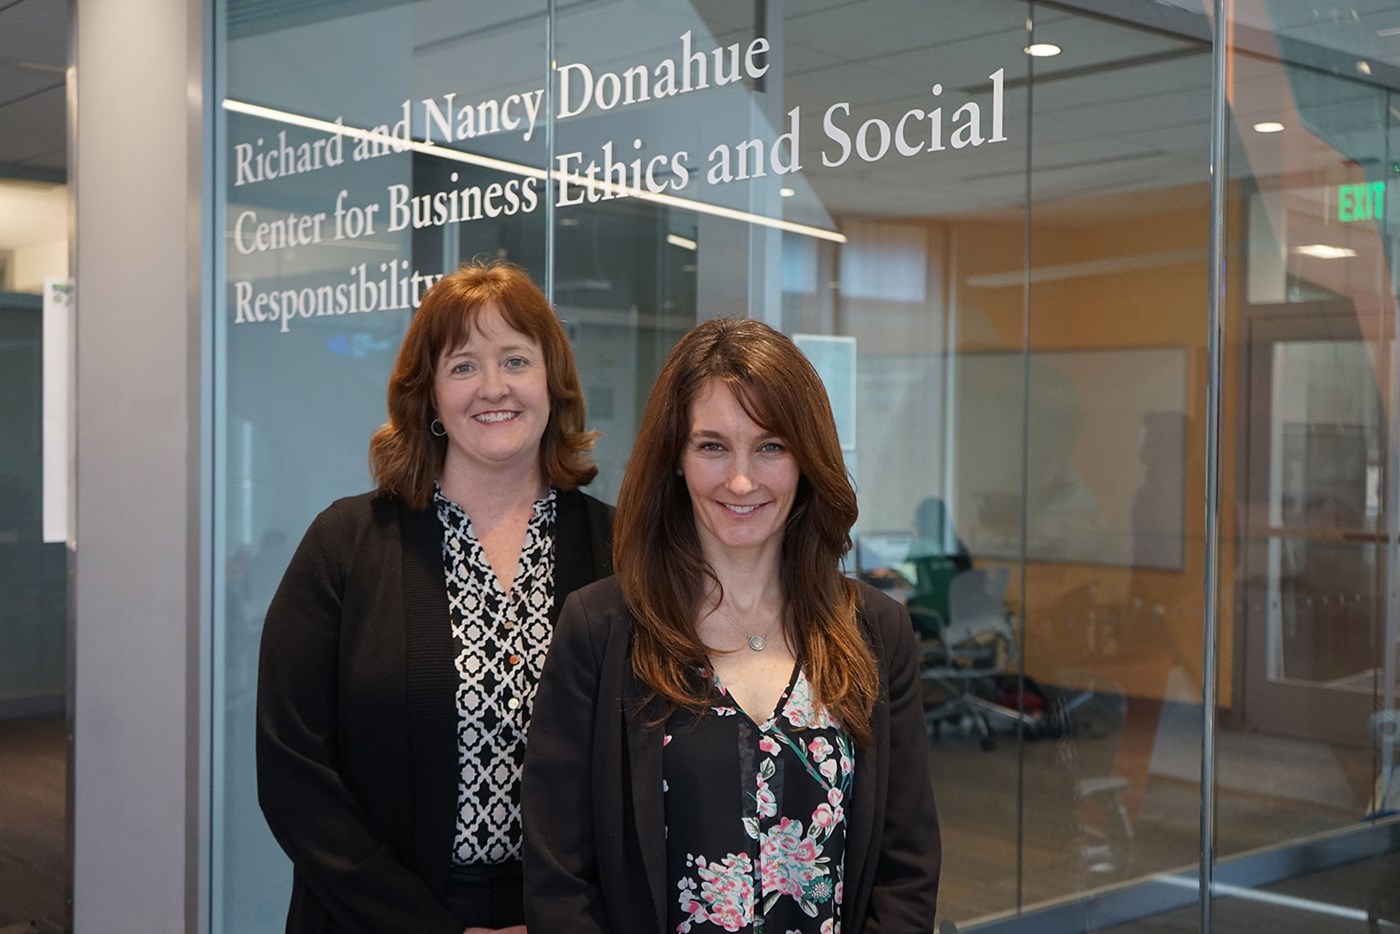 Elaine Magnant and Erica Steckler in front of the Donahue Center for Business Ethics